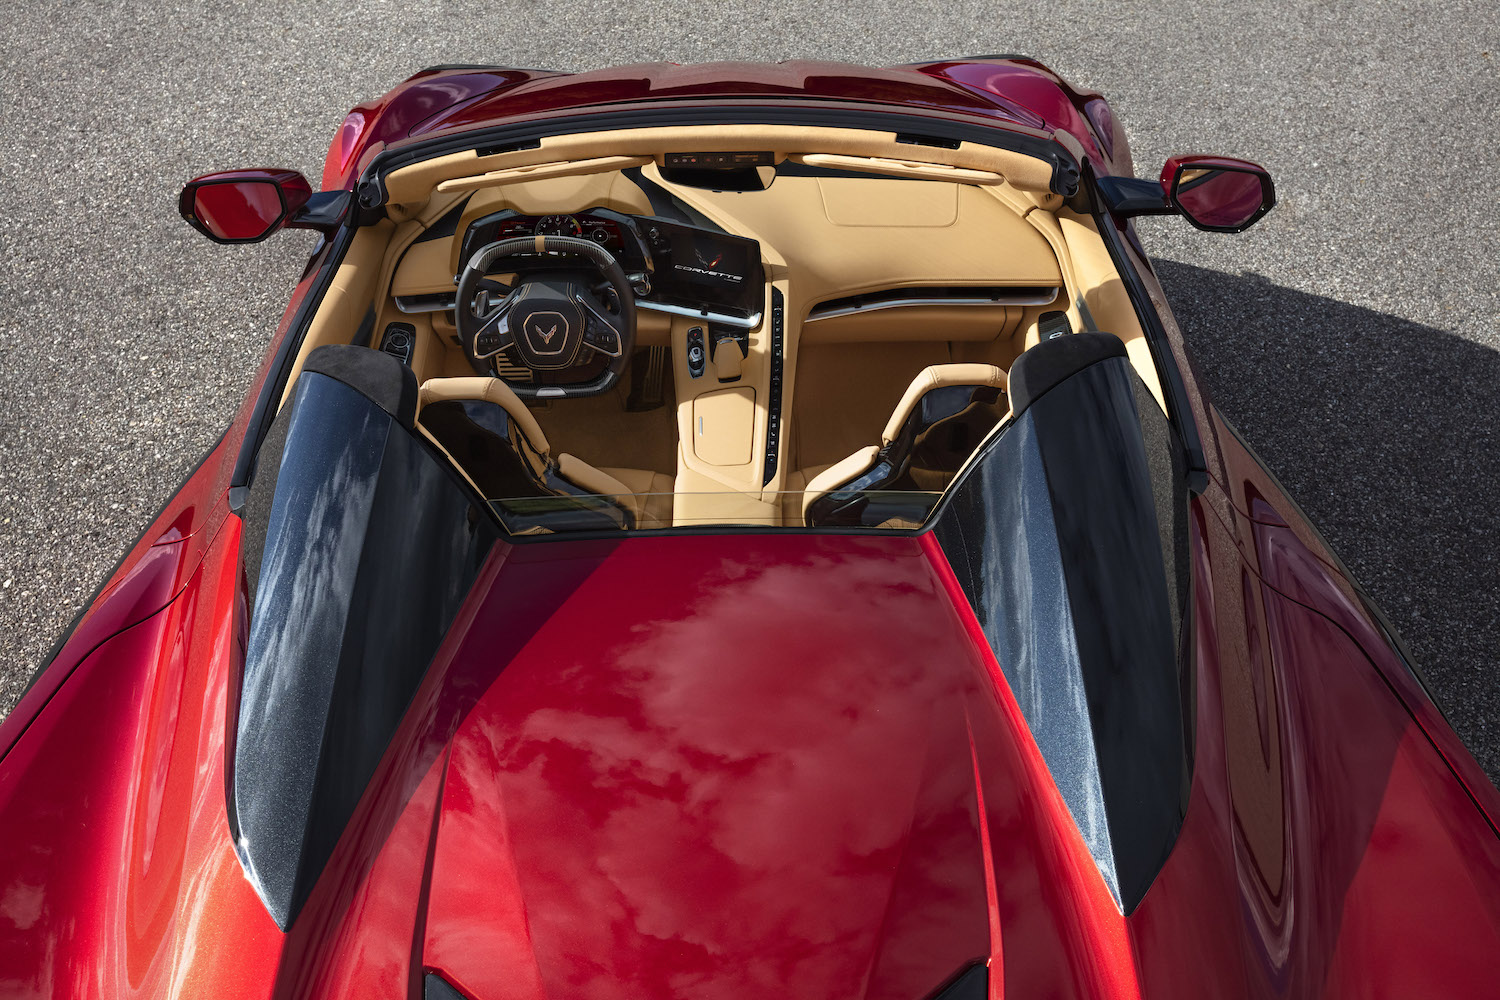 This is a promo of the 2023 Corvette Z06 interior: red over tan leather. A Chevrolet engineer admitted the supercar project targeted the Ferrari 458. | General Motors